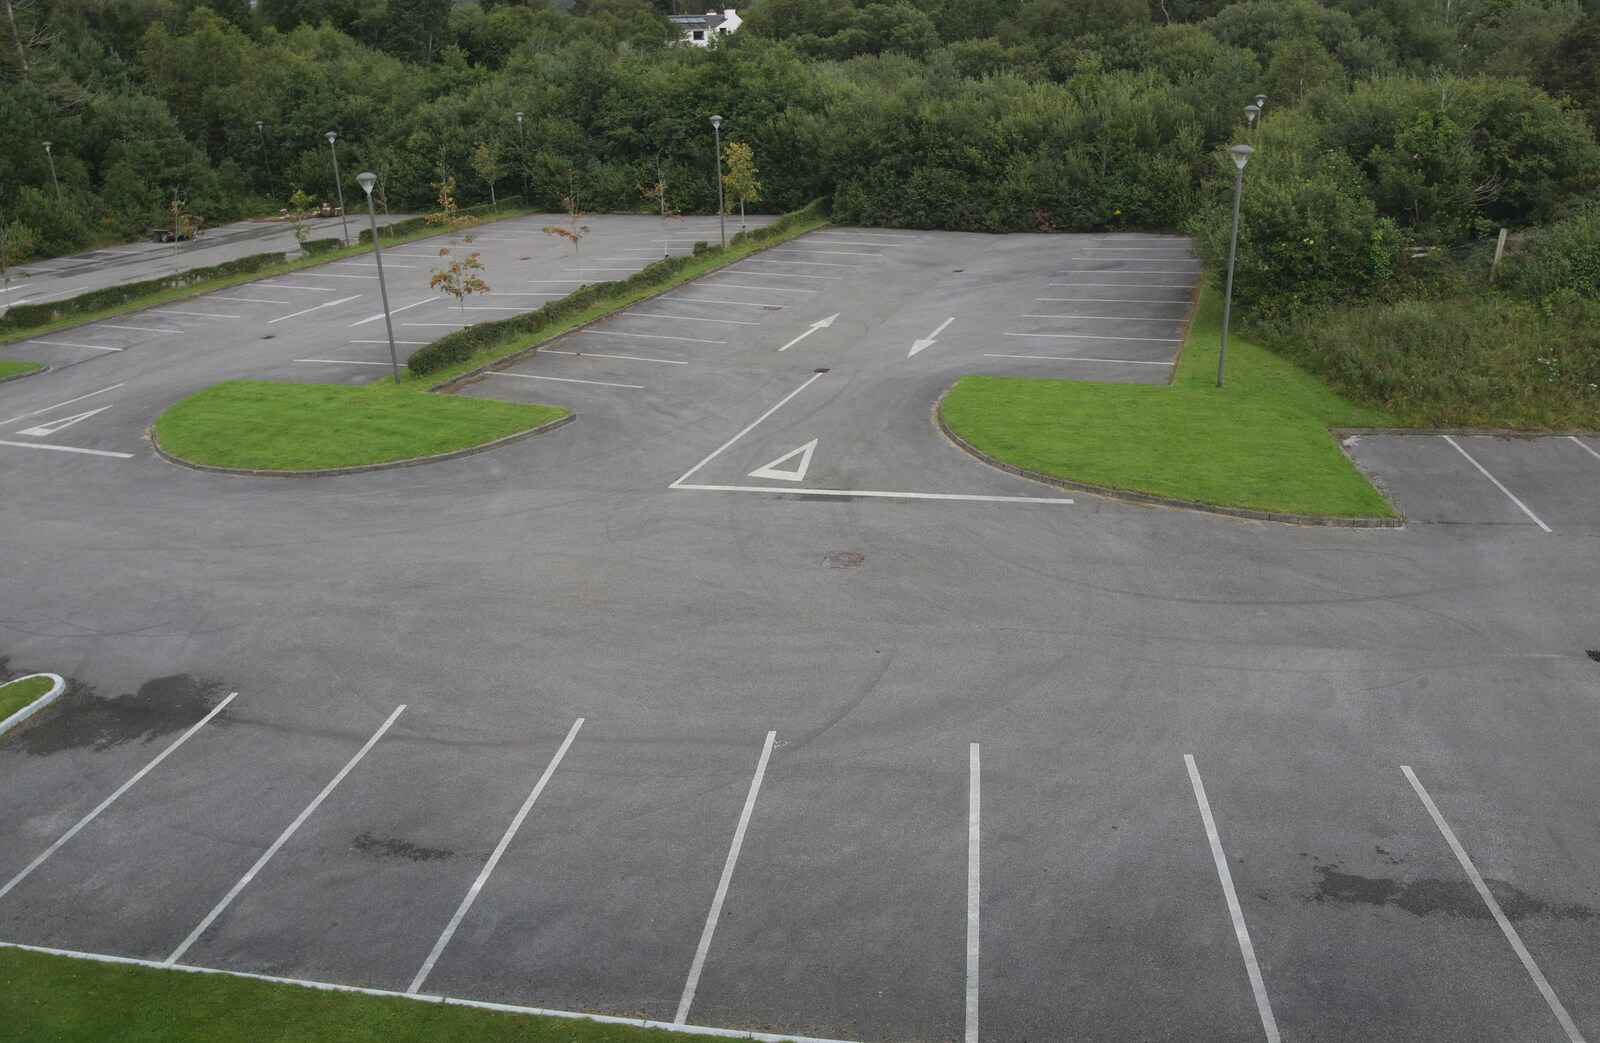 The huge car park is always empty in the morning from In The Sneem, An tSnaidhm, Kerry, Ireland - 1st August 2017